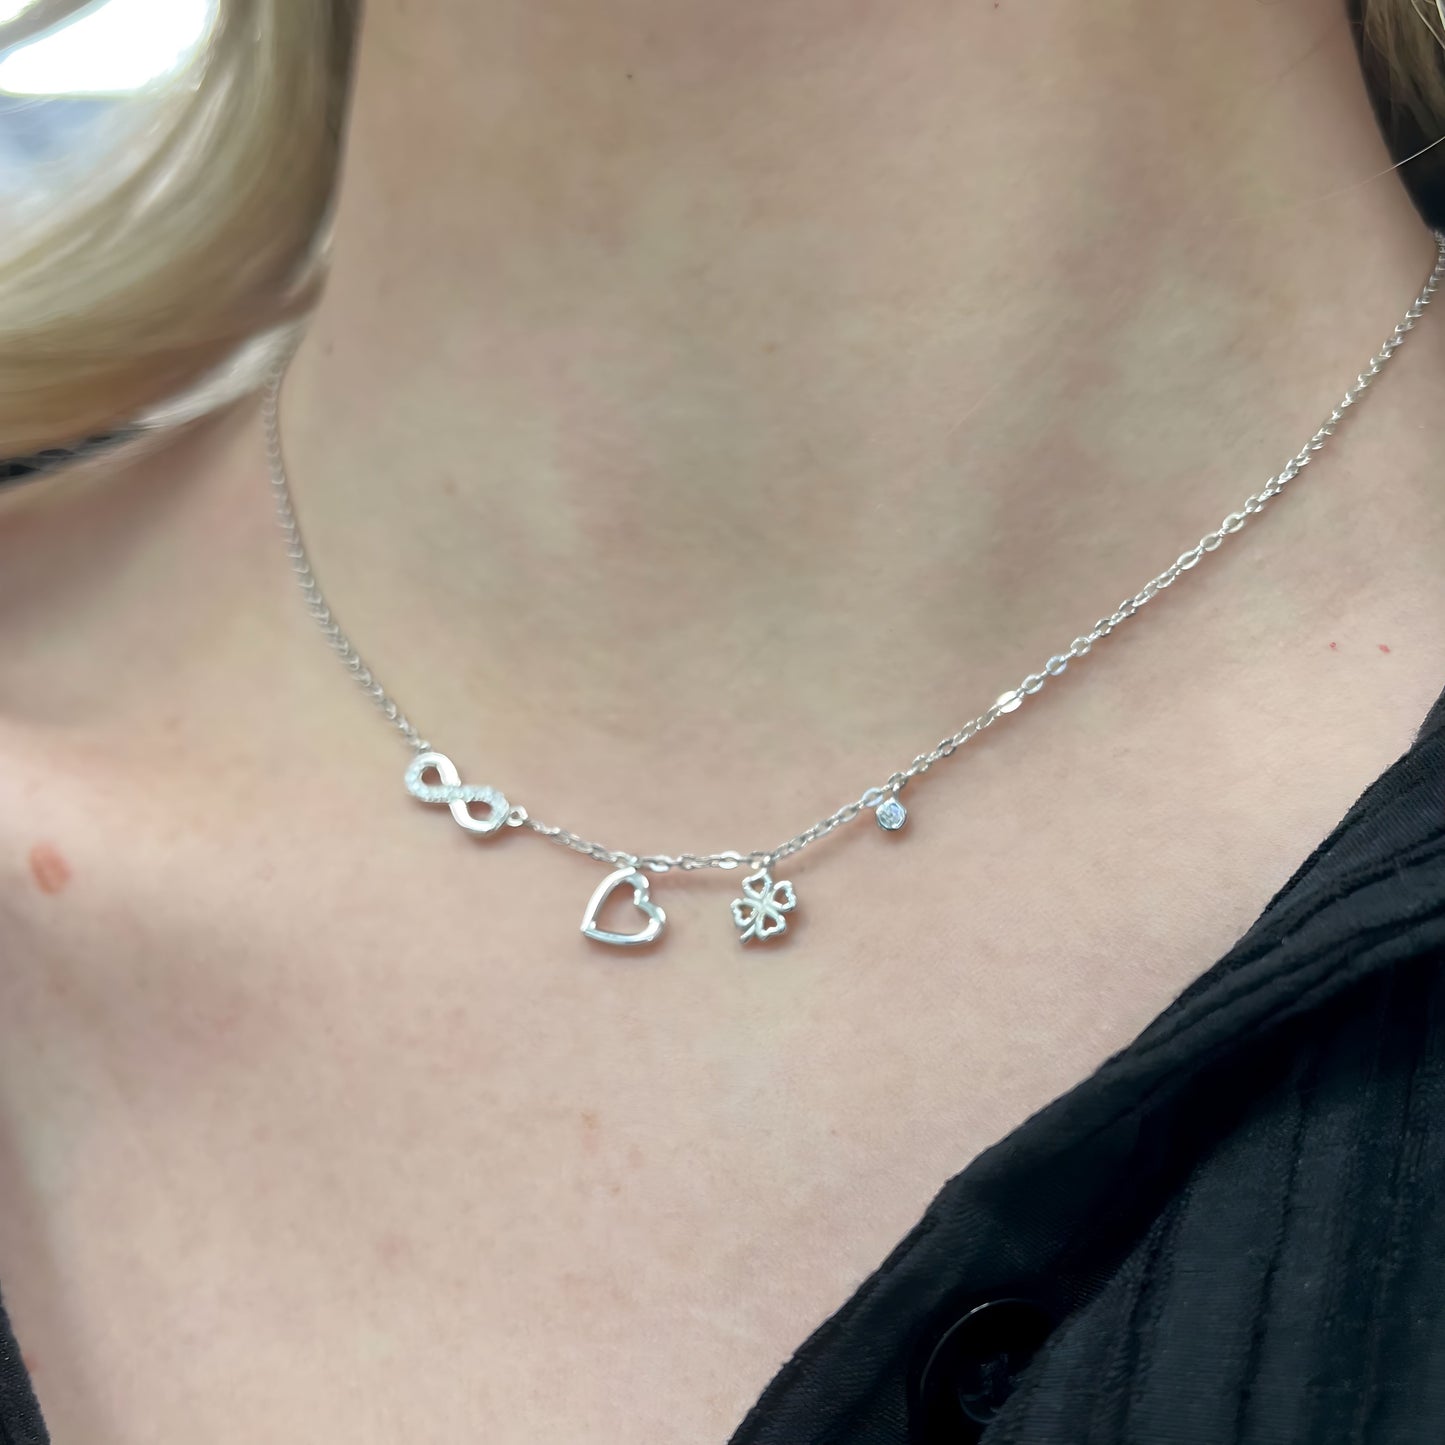 Dainty Sterling Silver Infinity, Heart and Clover Charm Necklace